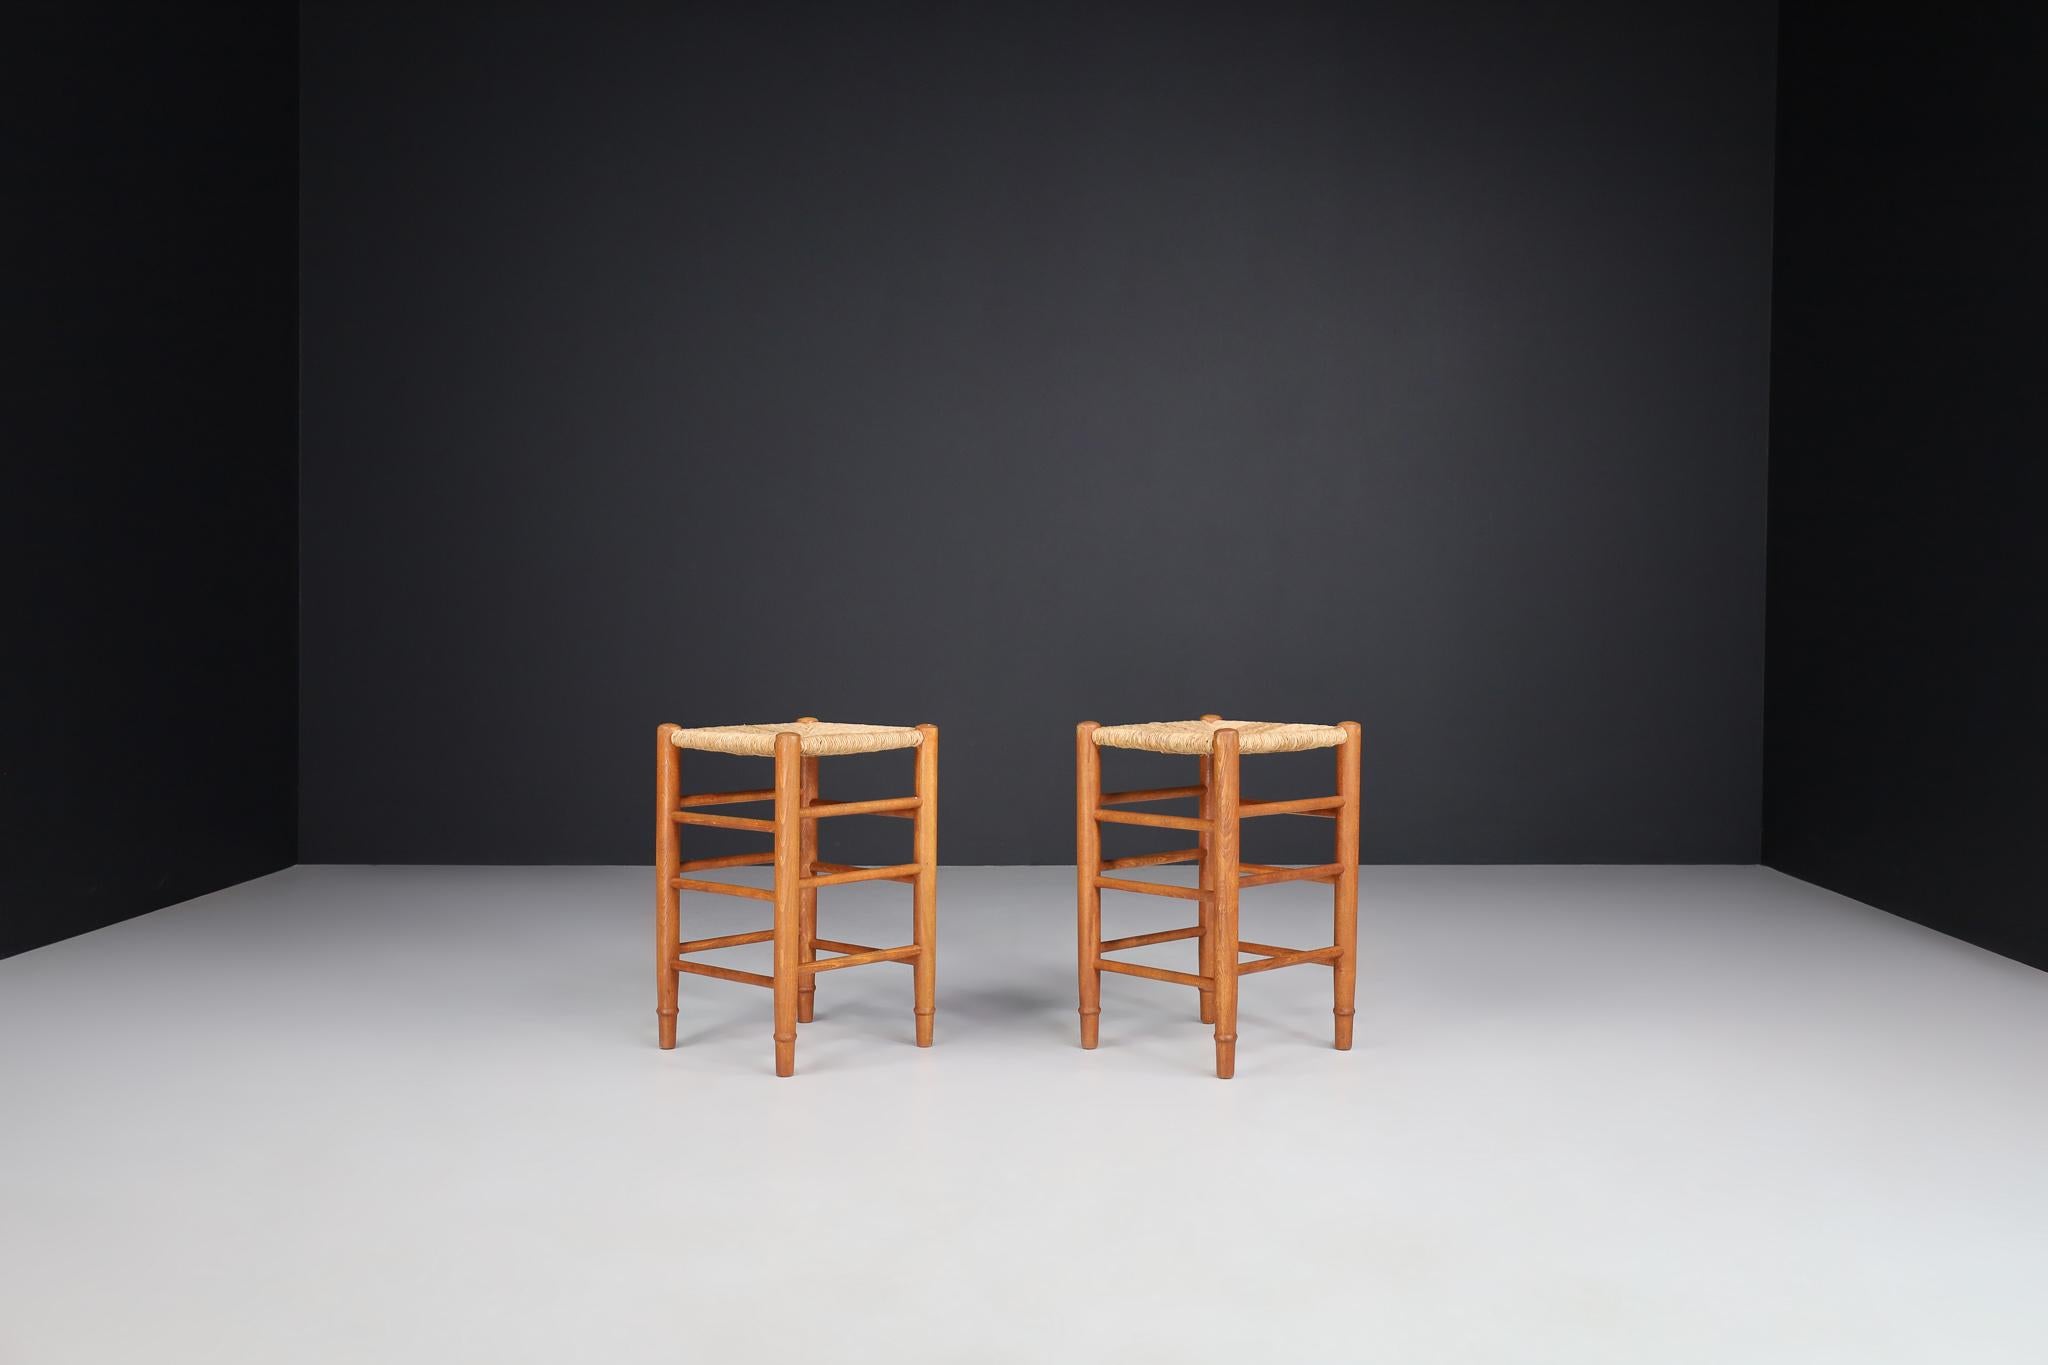 Pair of two French stools in the style of Charlotte Perriand, France, 1950s.

These solid oak stools show a lovely natural patina, are in excellent original condition and have a great patina and natural wear to the wood and rush. These stools would